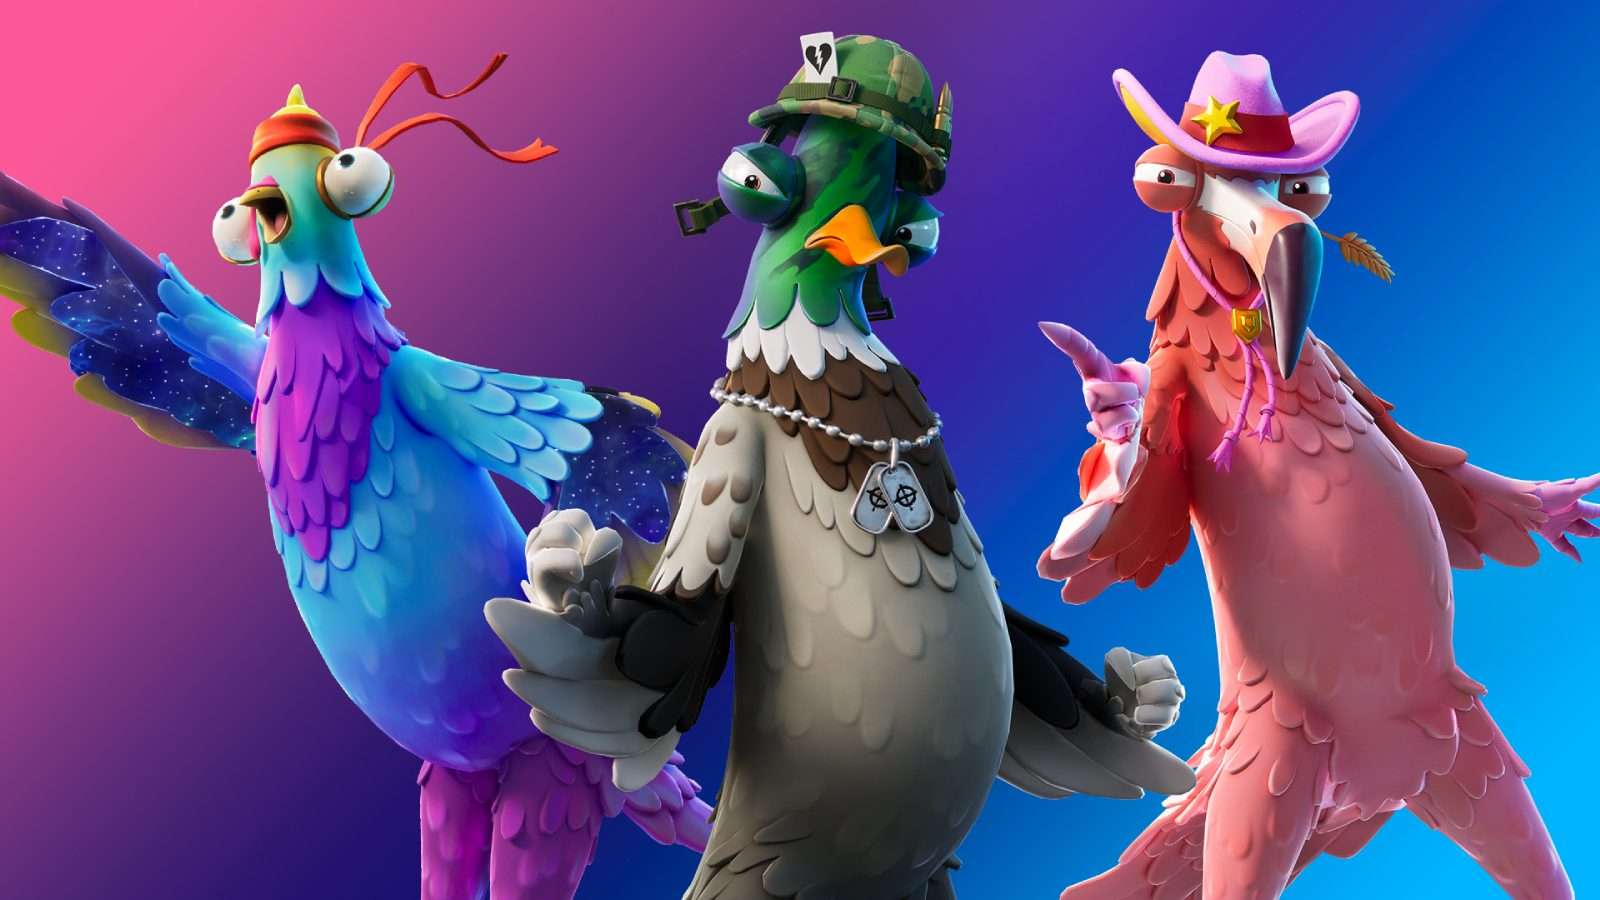 Fortnite Birds of a Feather skin